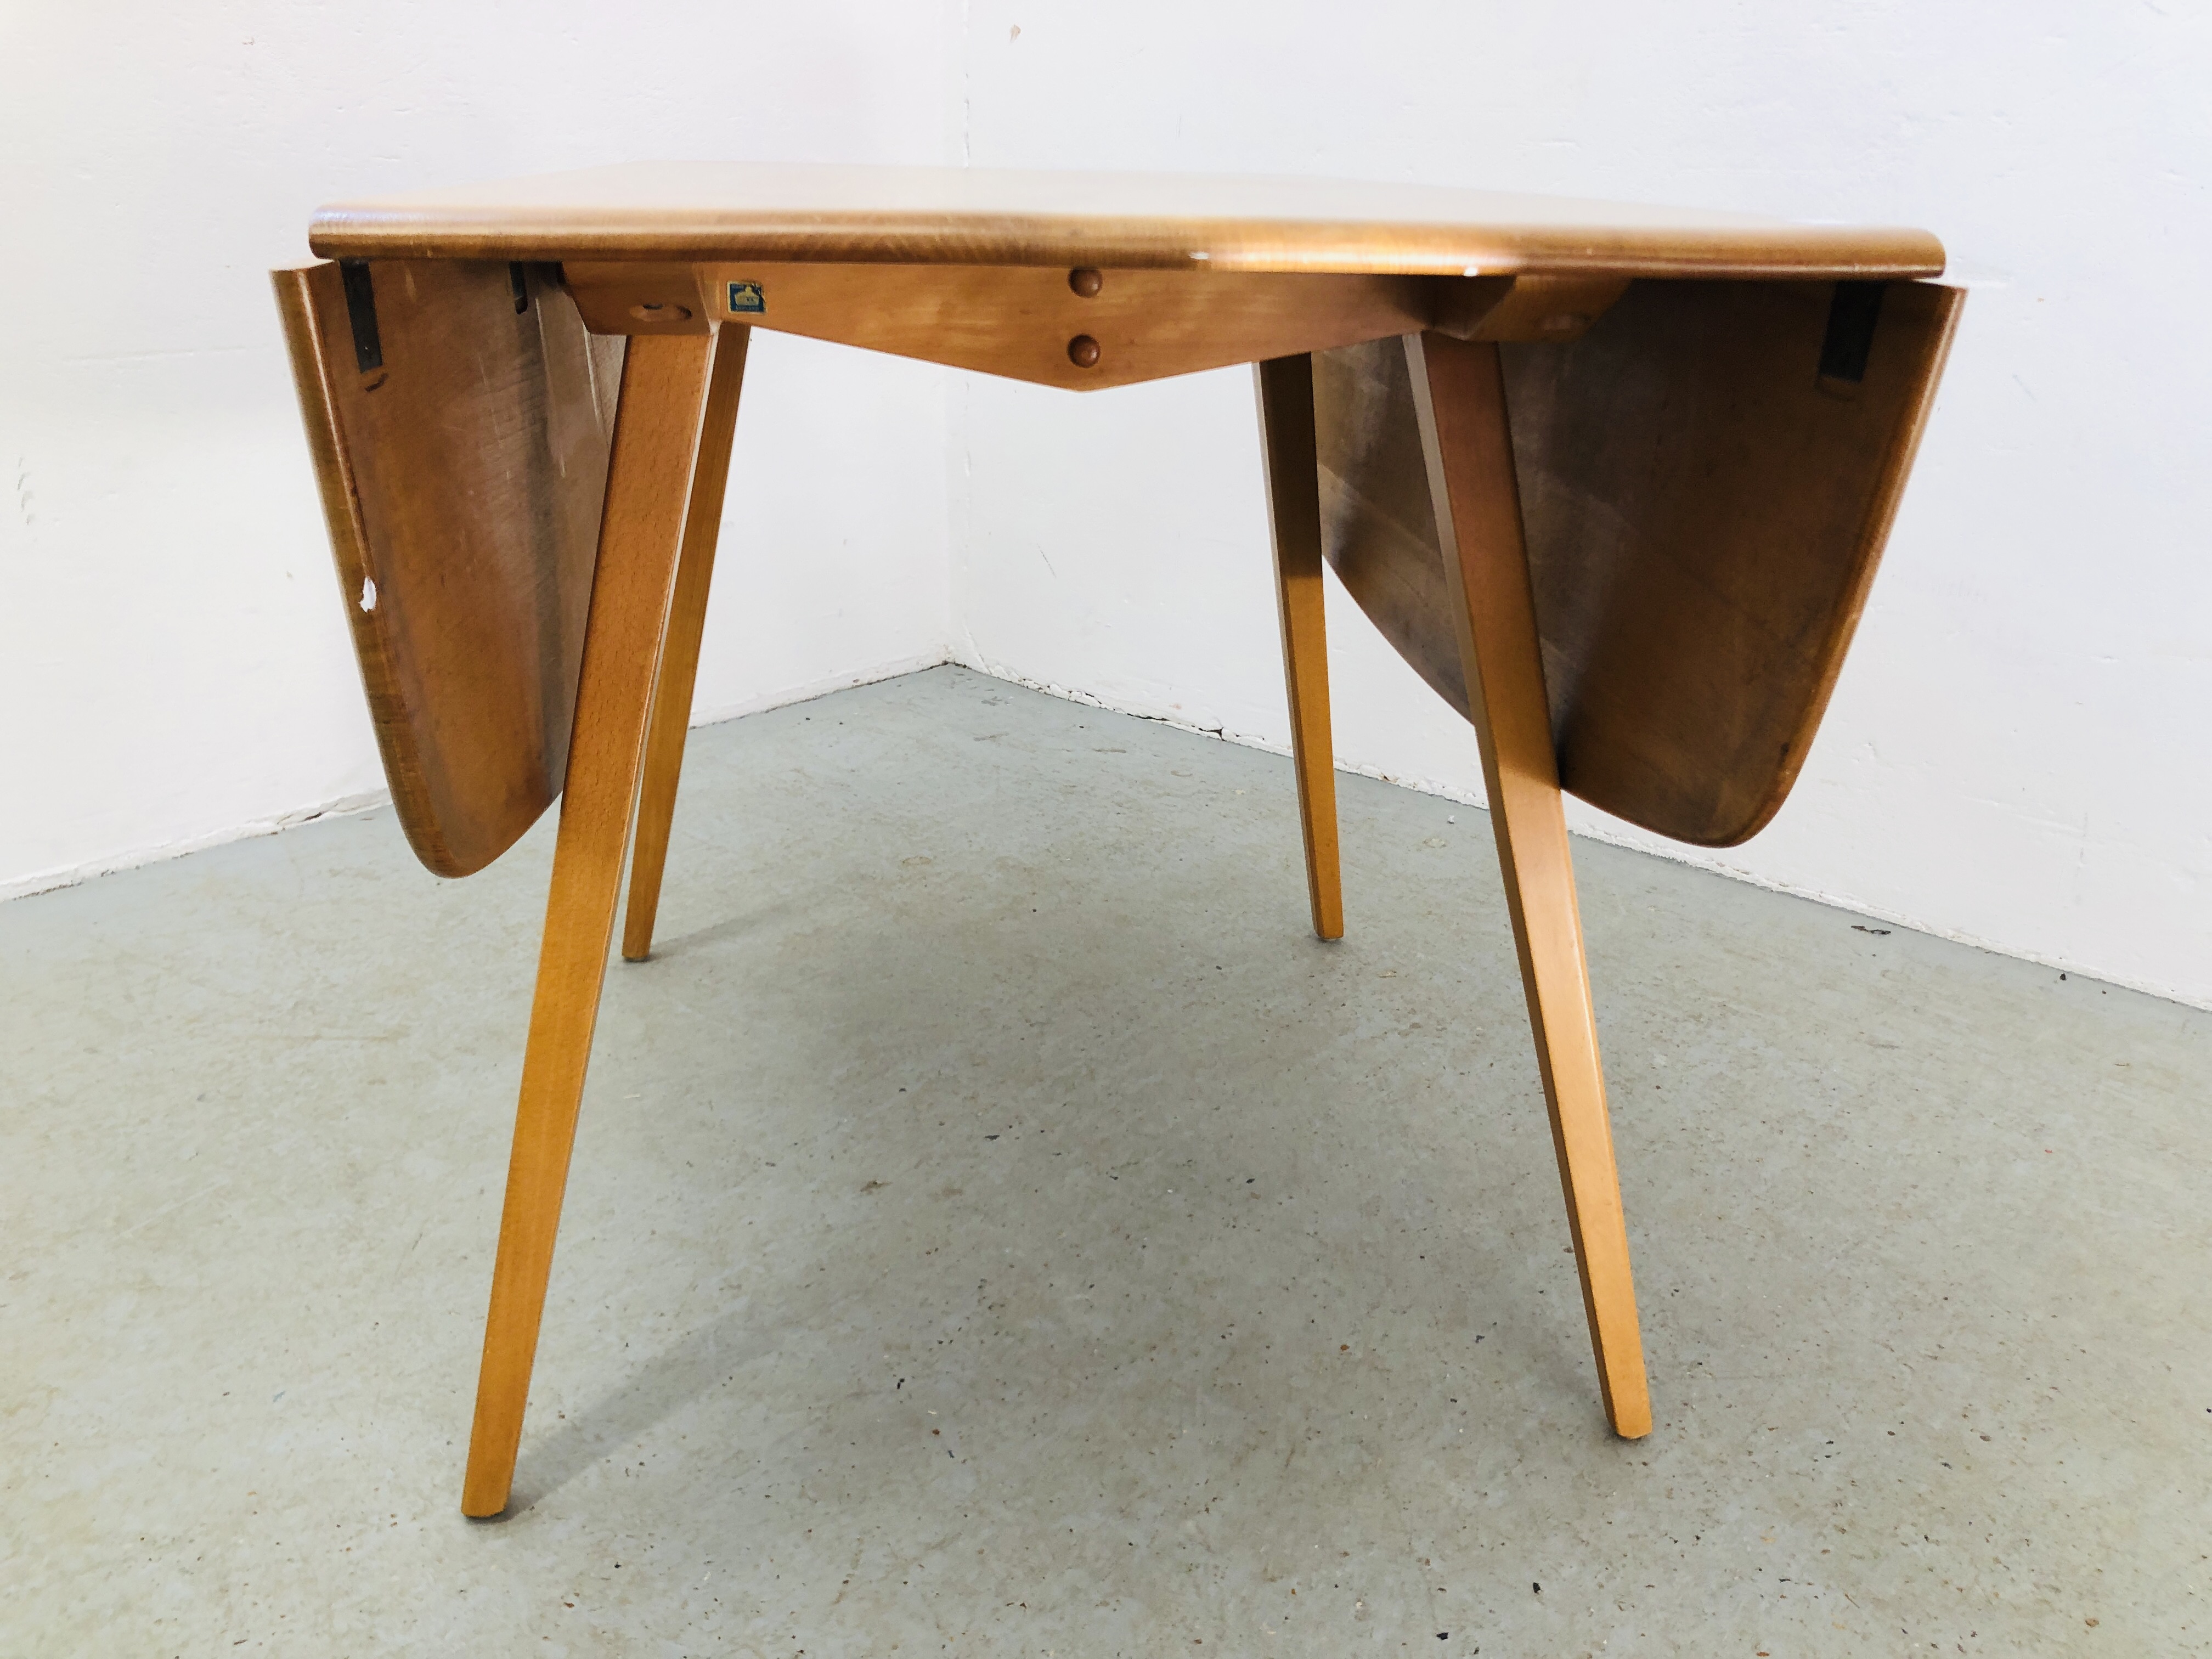 A BLONDE ERCOL DROP DINING TABLE - Image 11 of 11